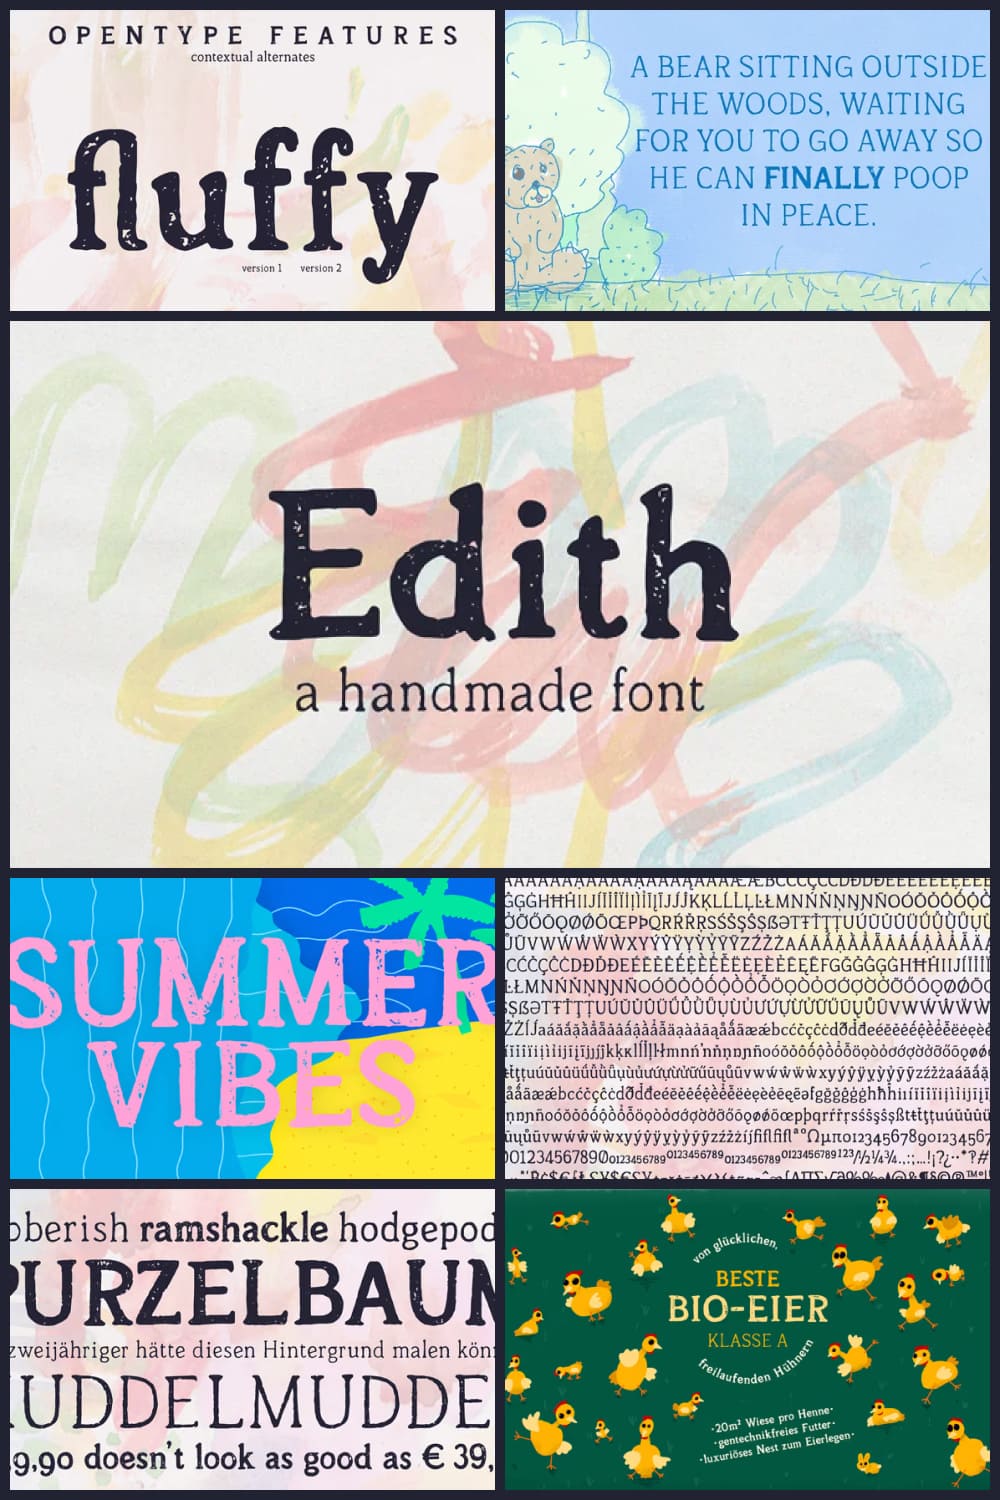 Collage of images with an example of using the font Edith.